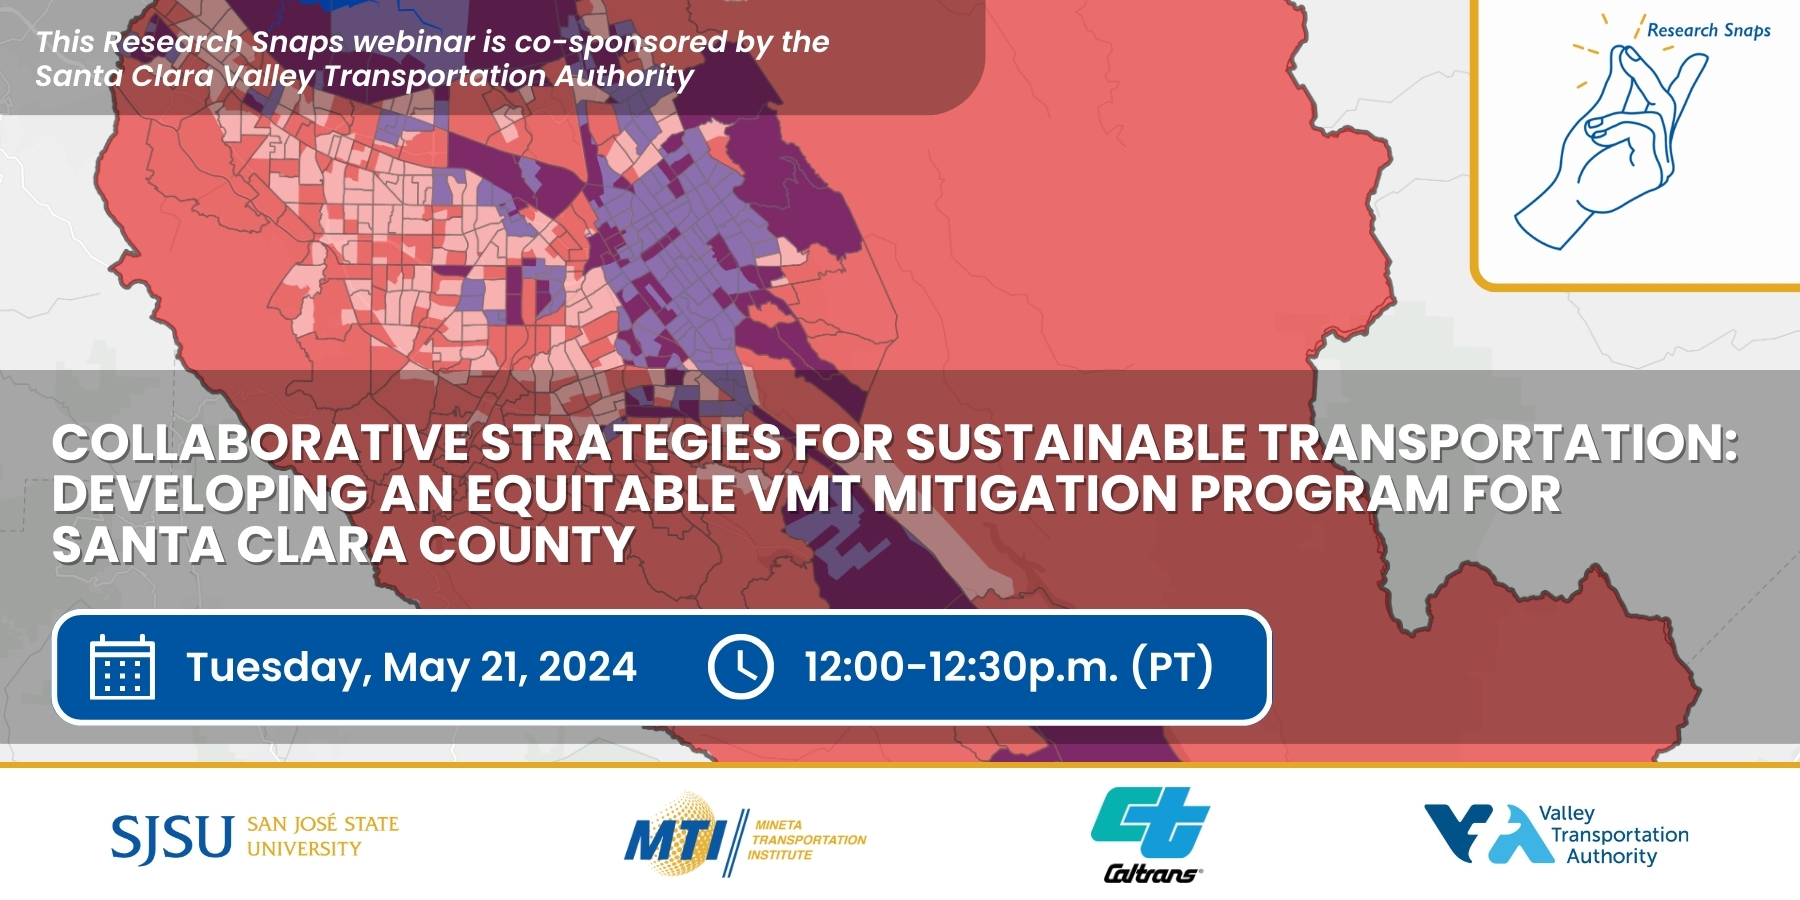 Collaborative Strategies for Sustainable Transportation: Developing an Equitable VMT Mitigation Program for Santa Clara County